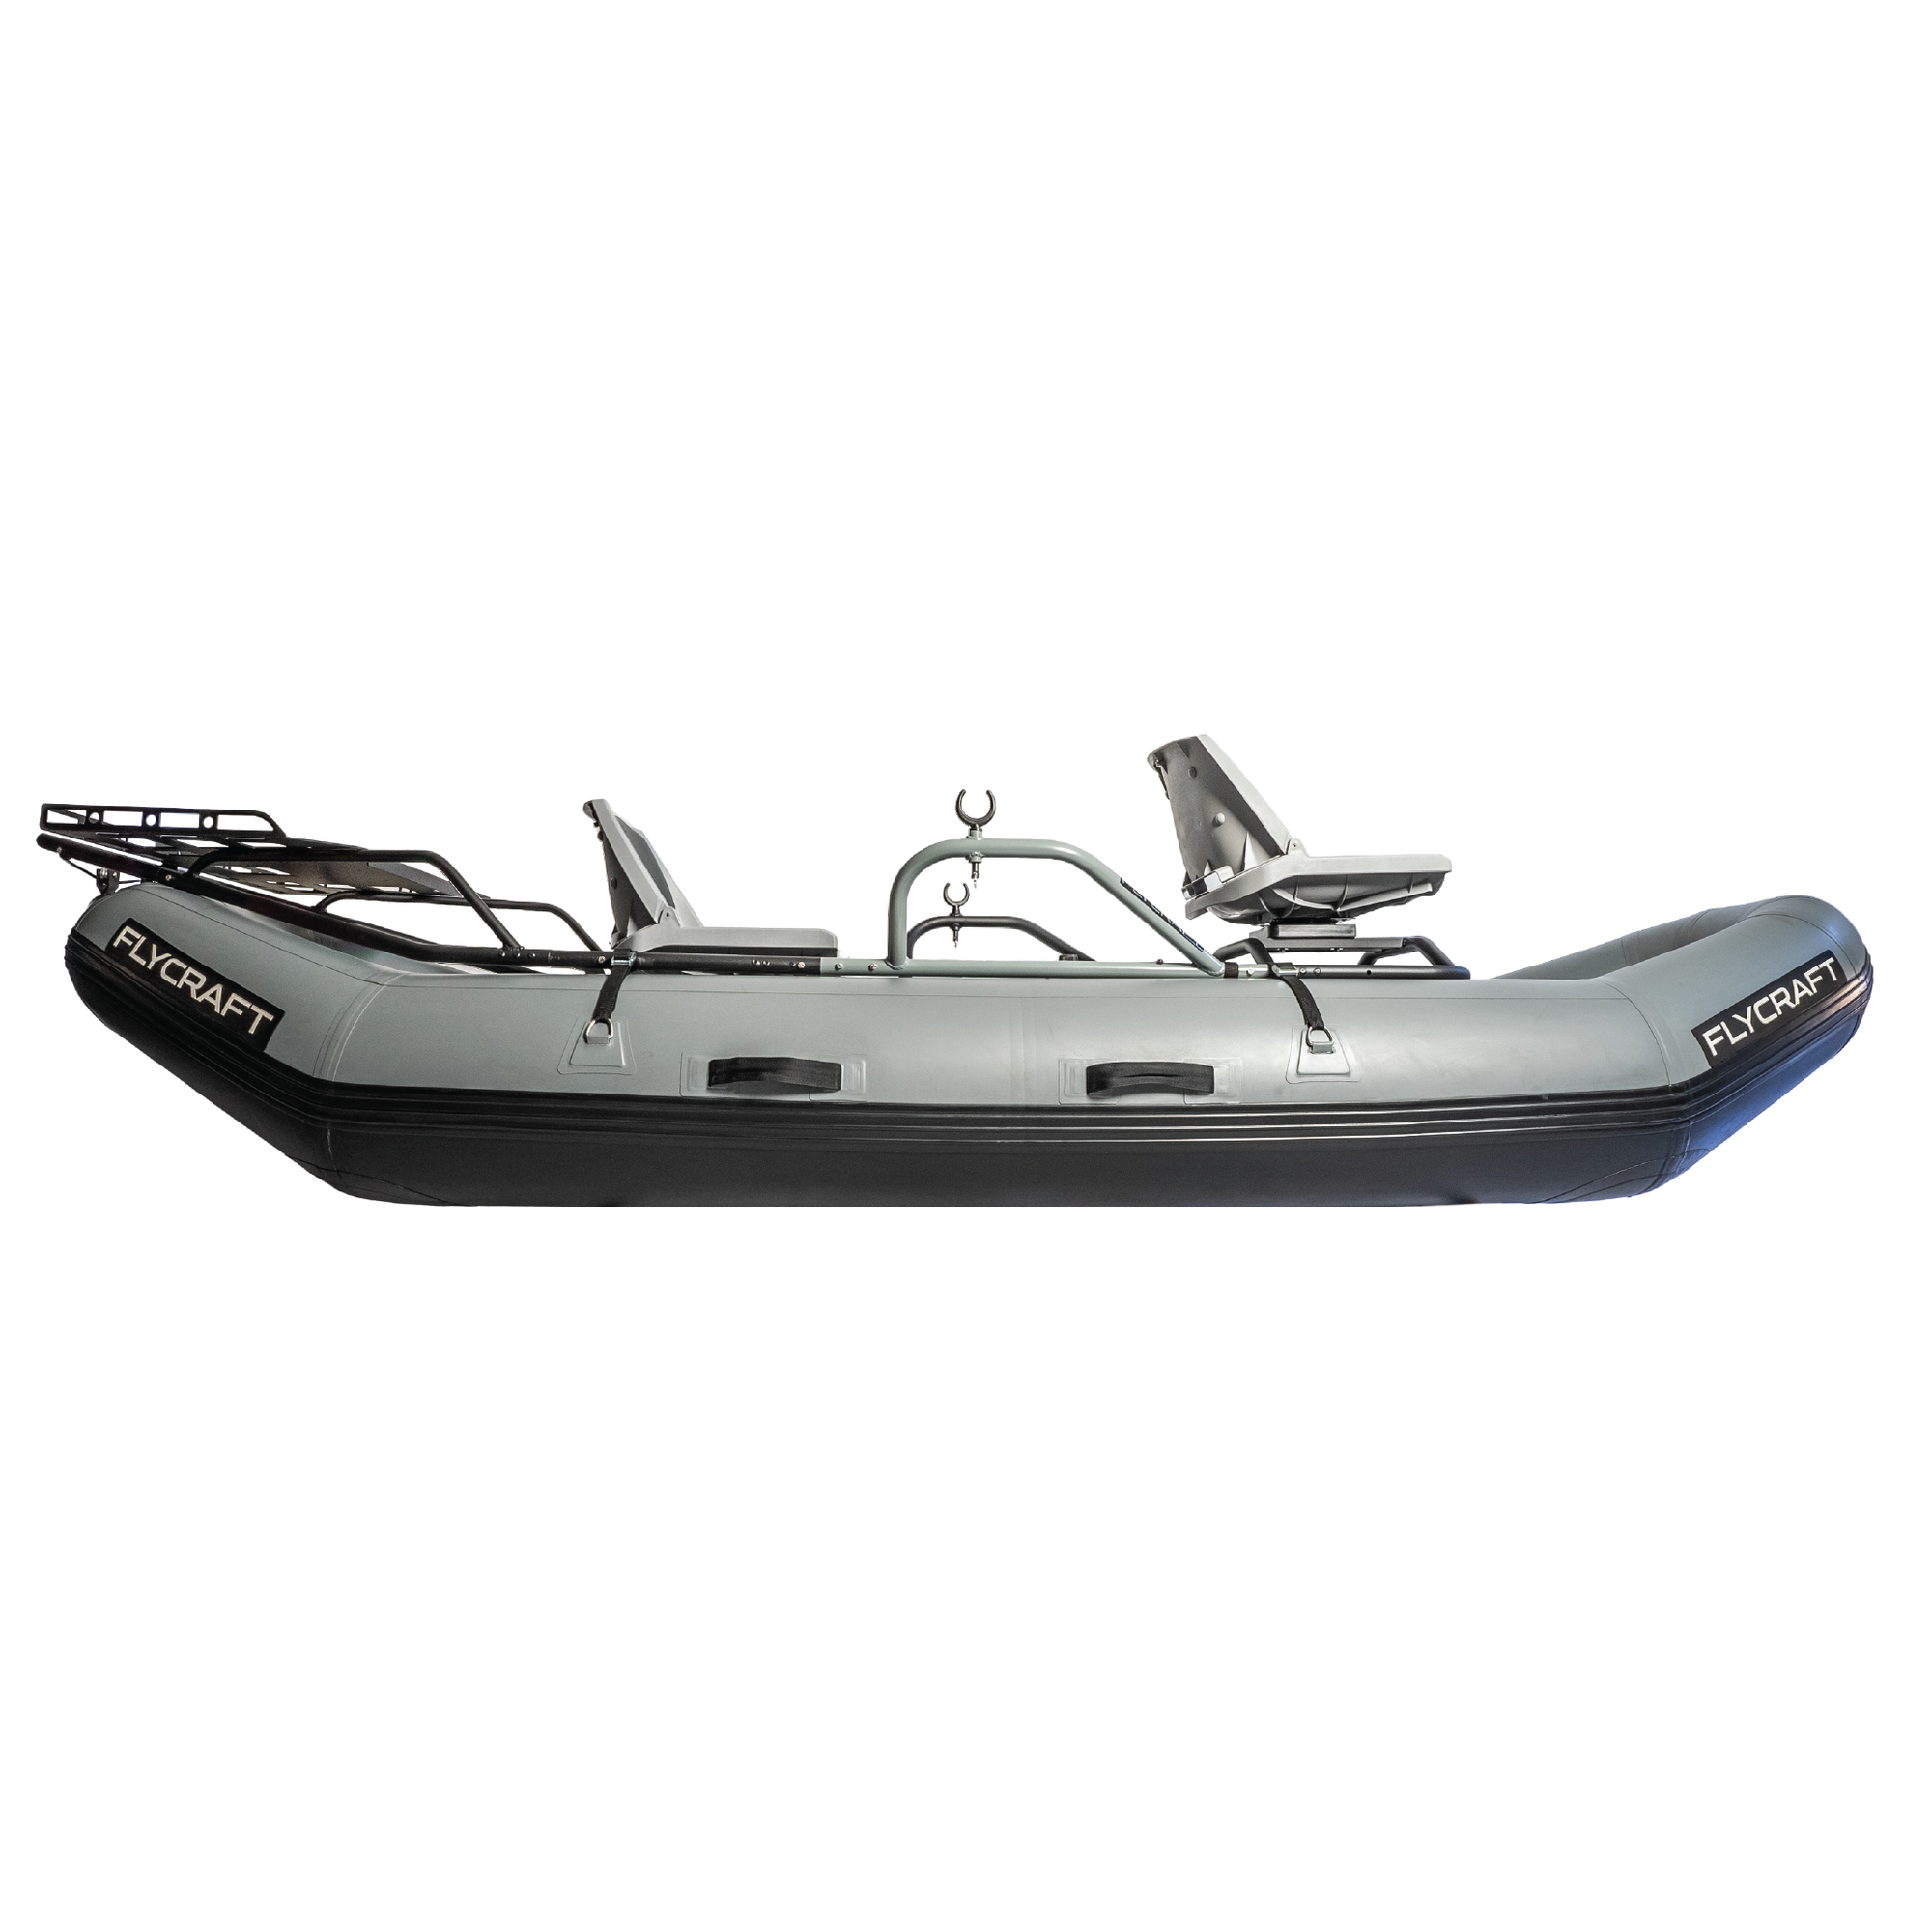 Upgrade Your Fishing Experience with Inflatable Boats